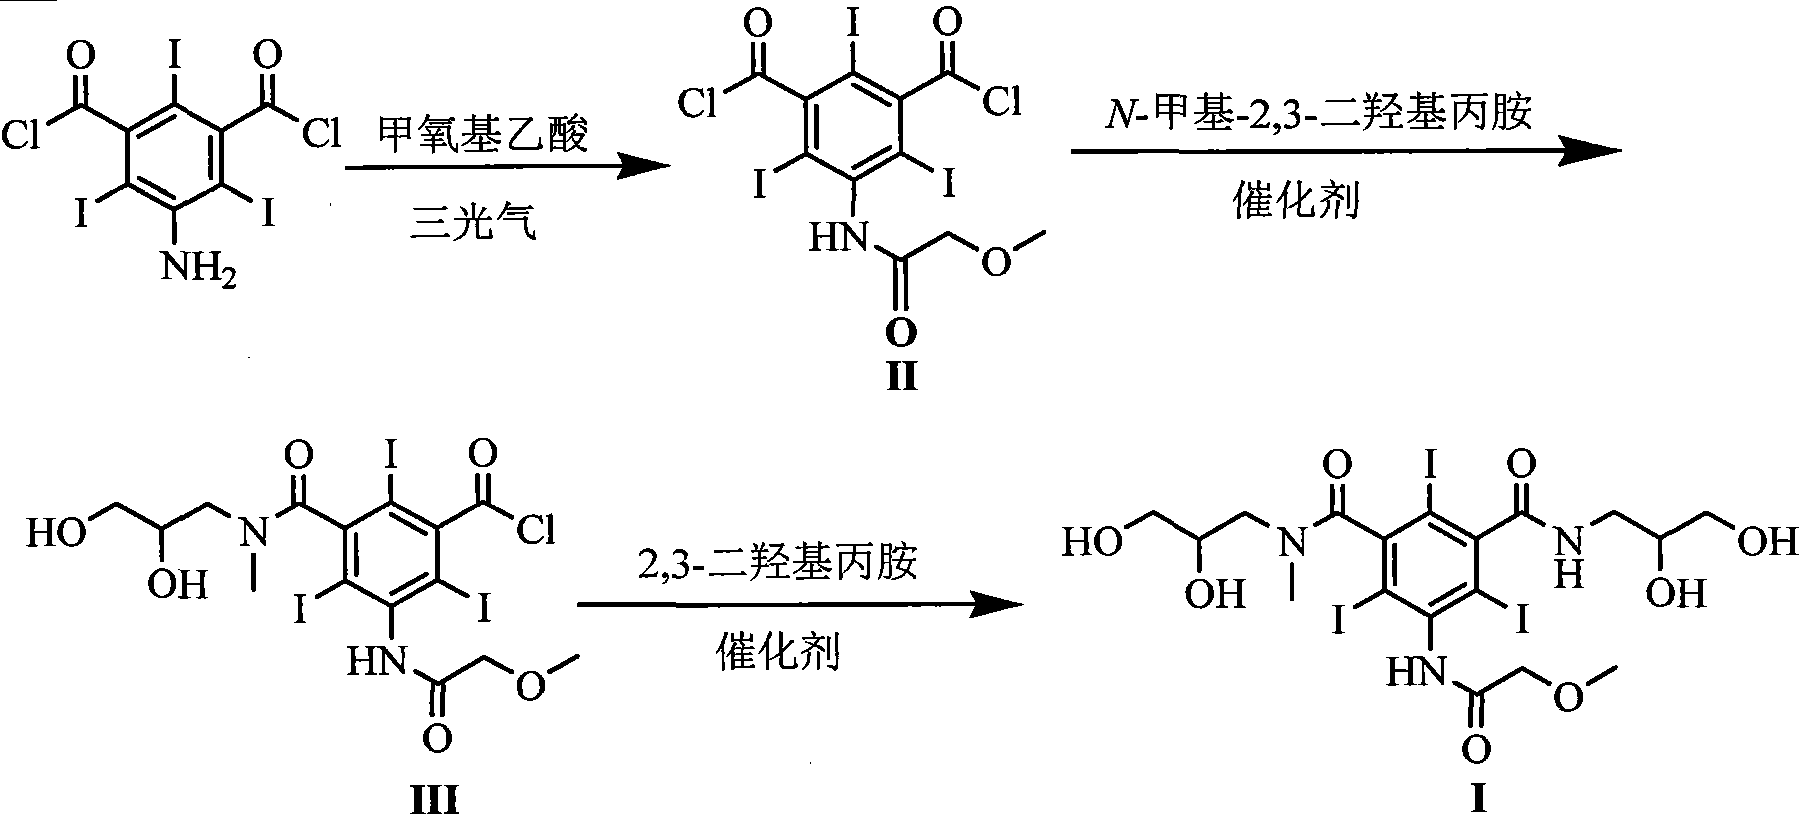 Novel synthesis method for iopromide